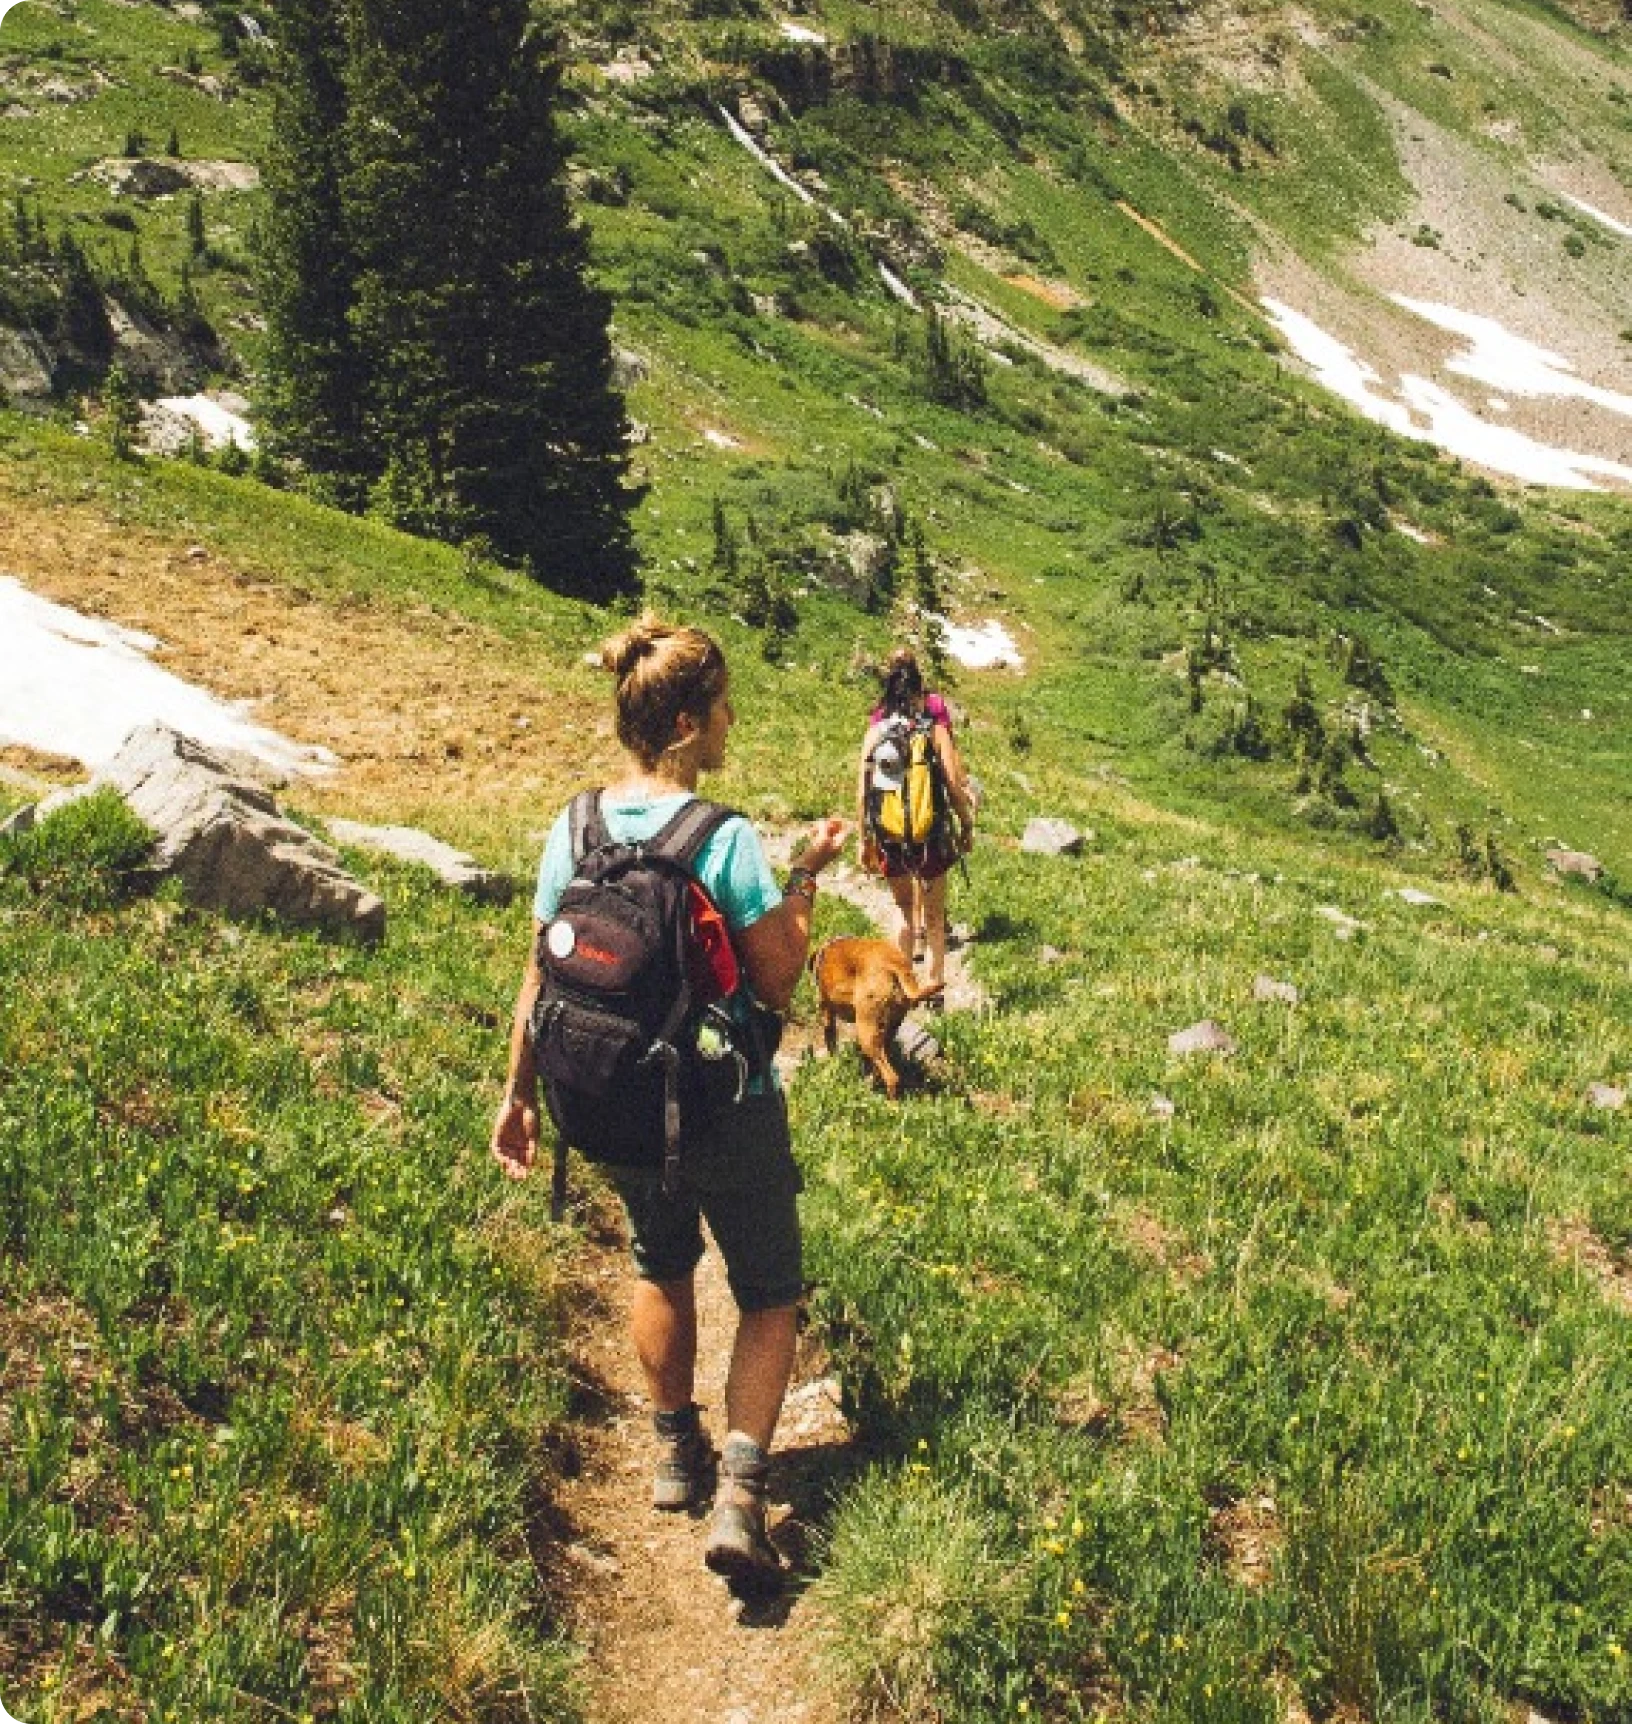 Hikers and a dog on a mountain trail in summer.